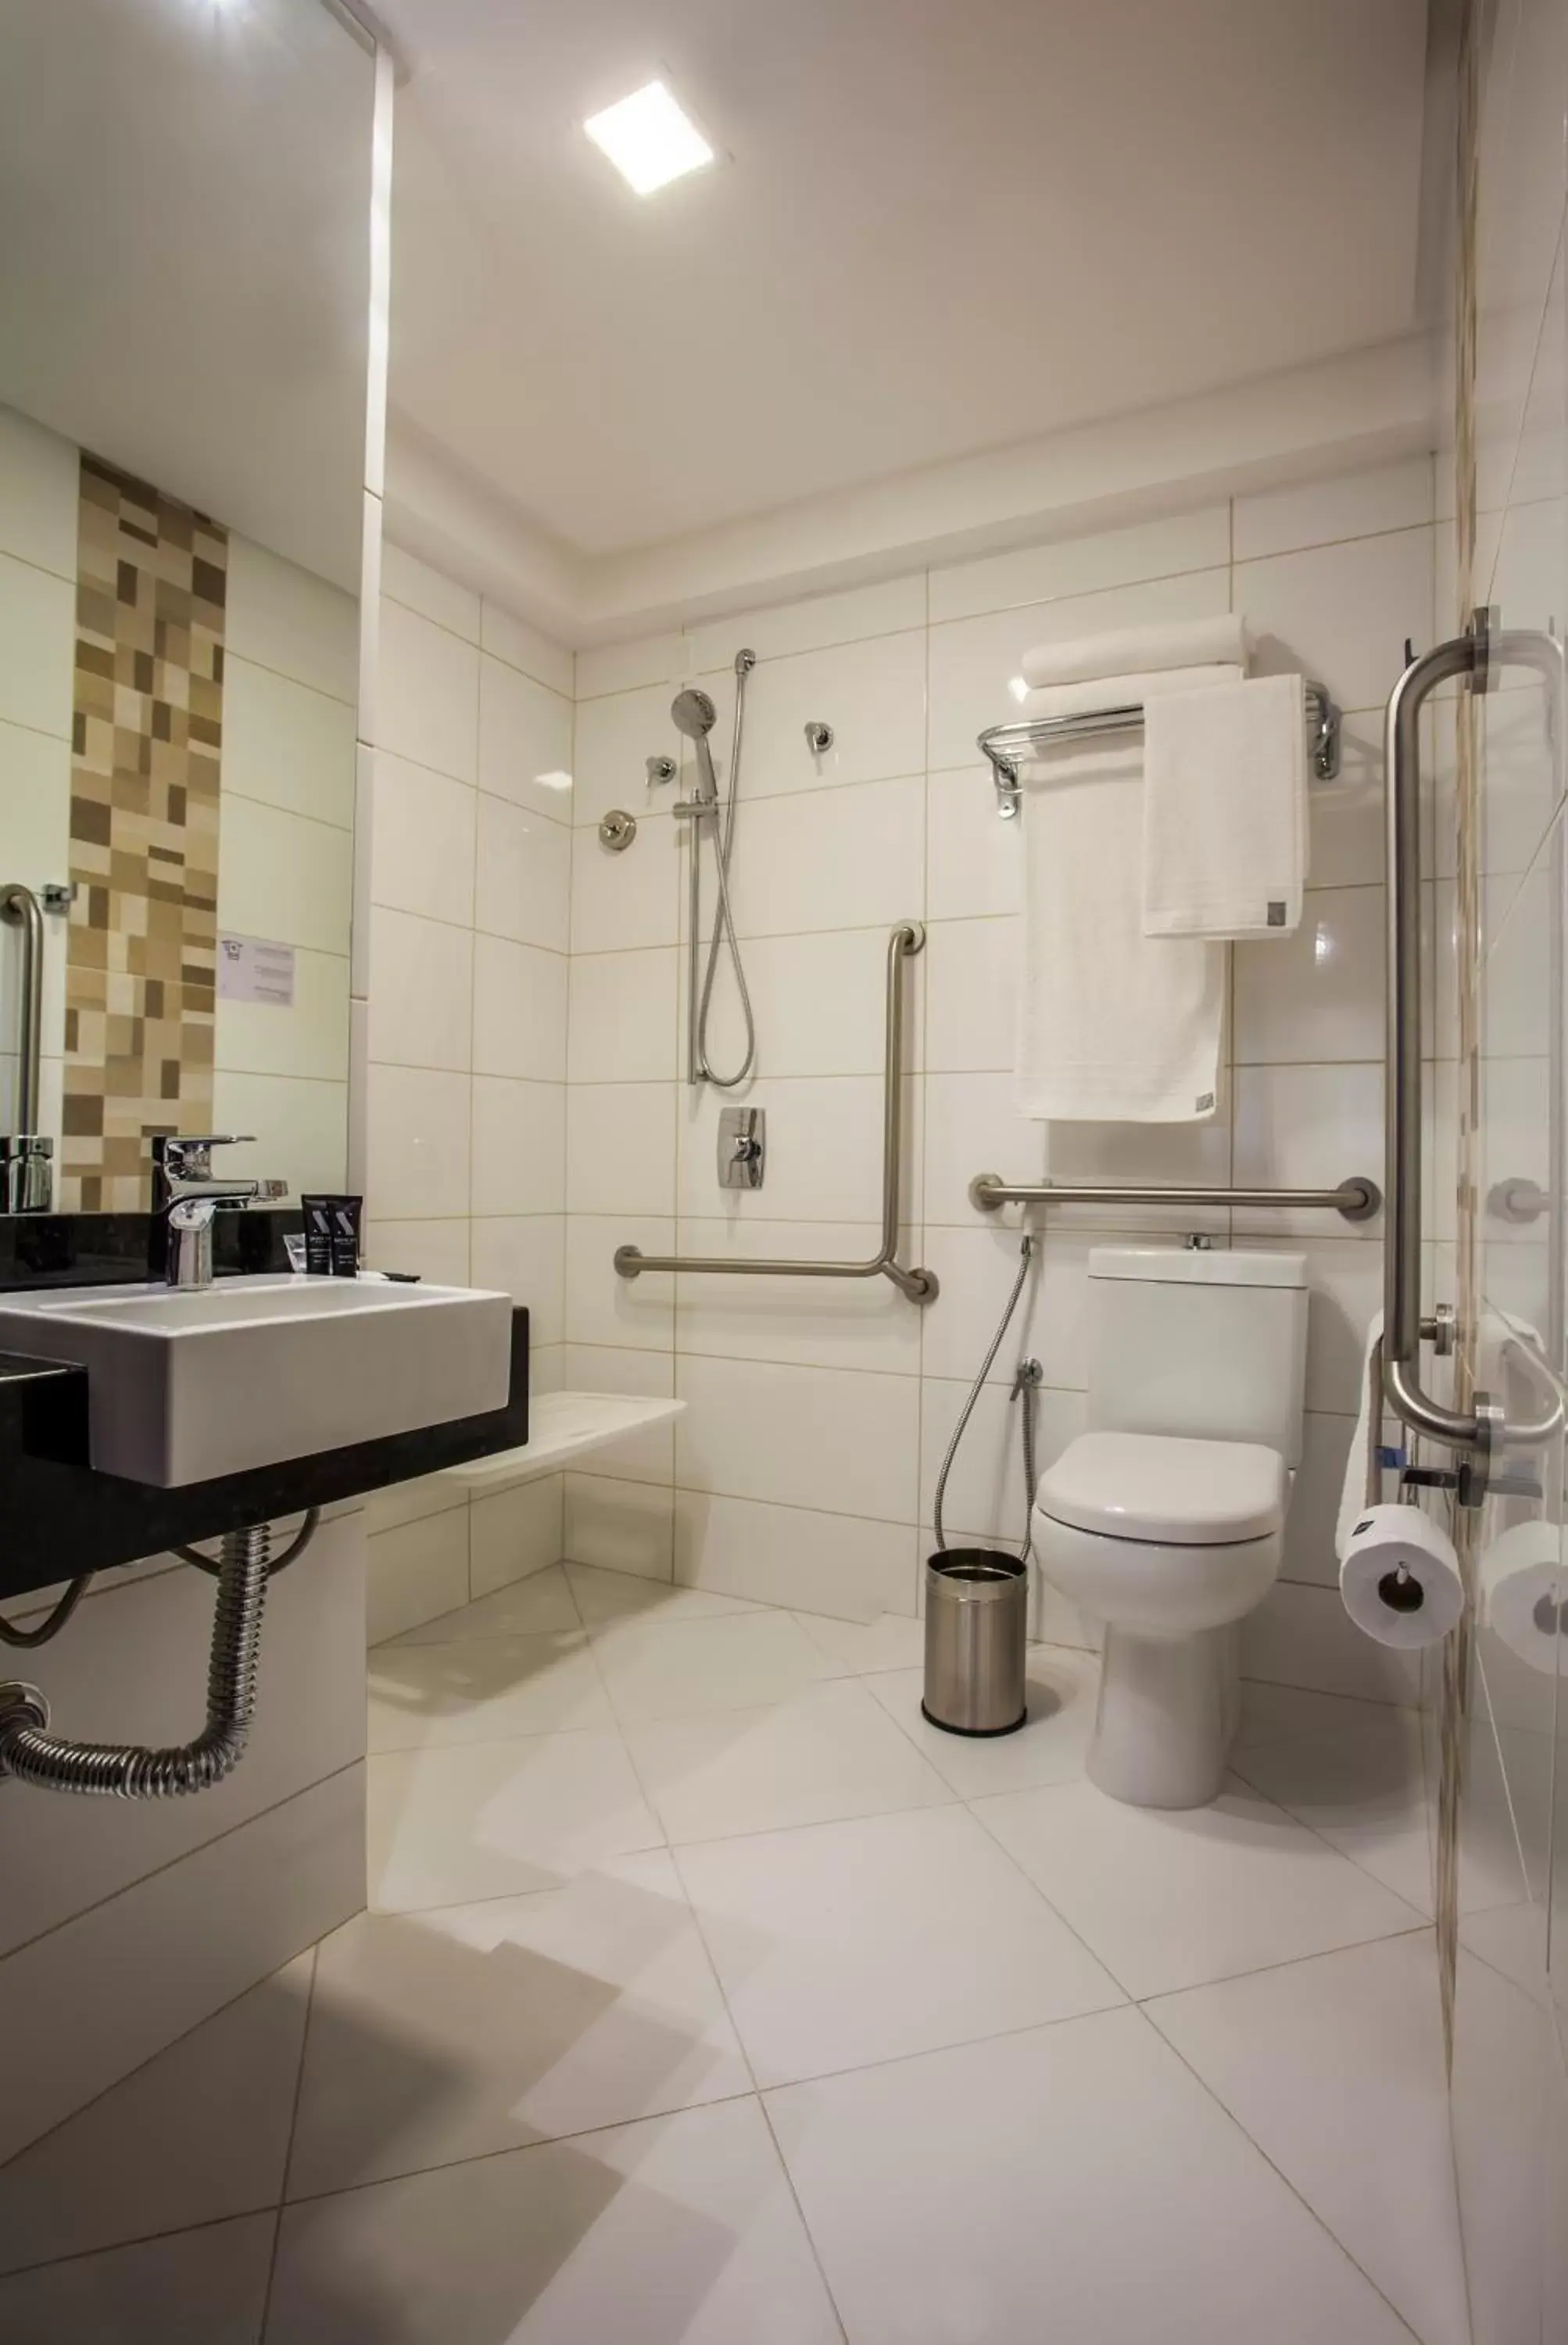 Facility for disabled guests, Bathroom in Santa Inn Hotel